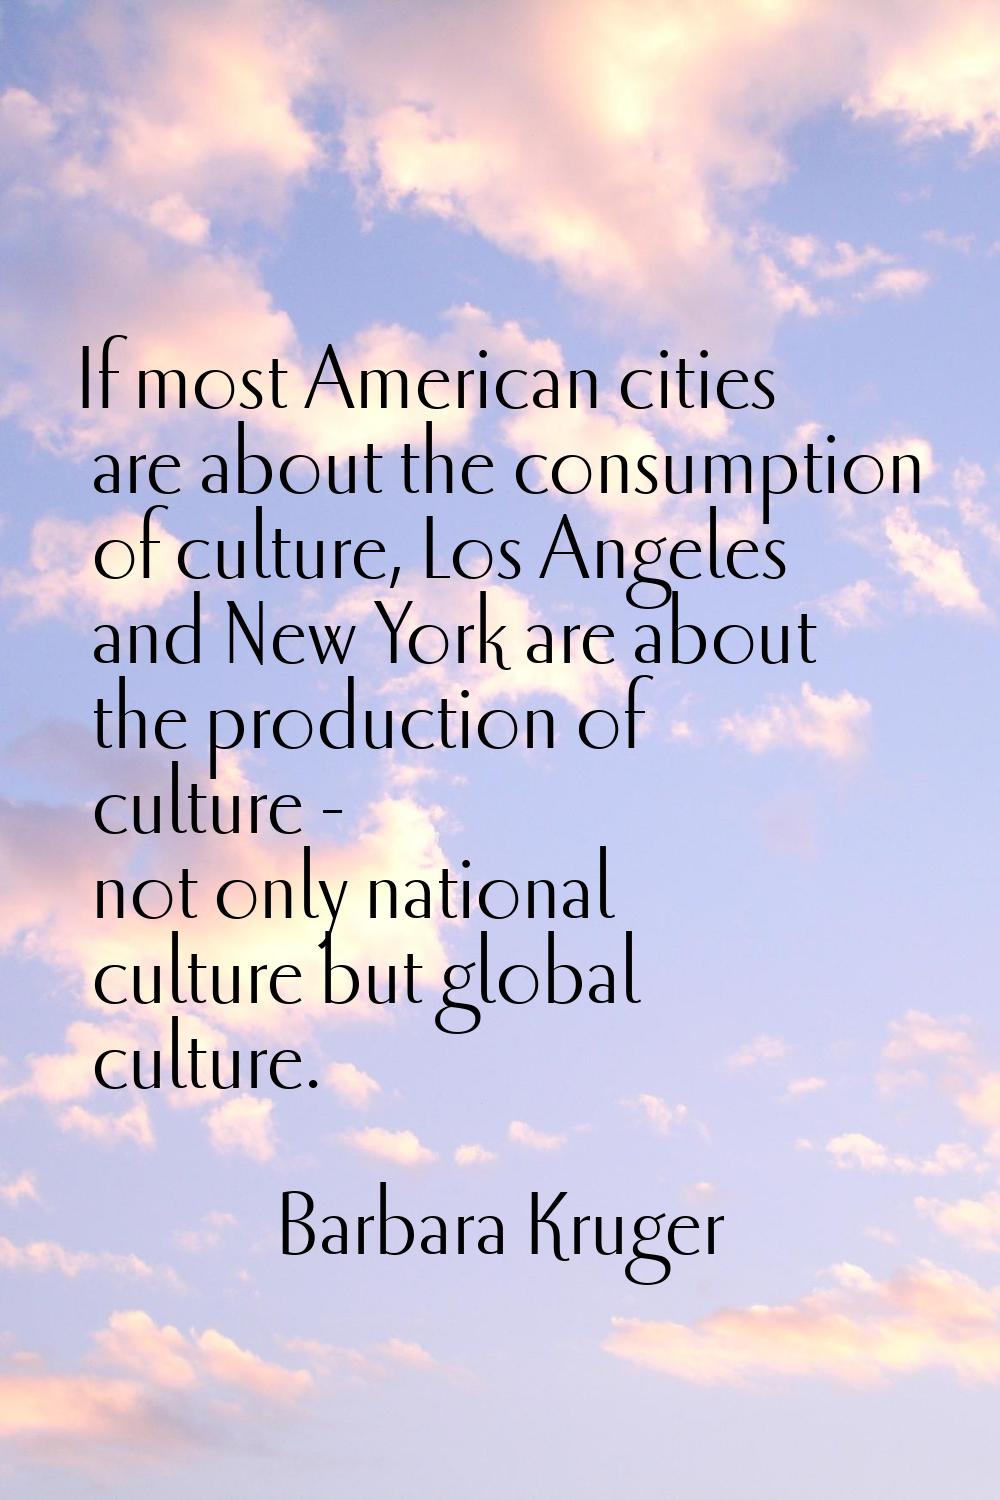 If most American cities are about the consumption of culture, Los Angeles and New York are about th